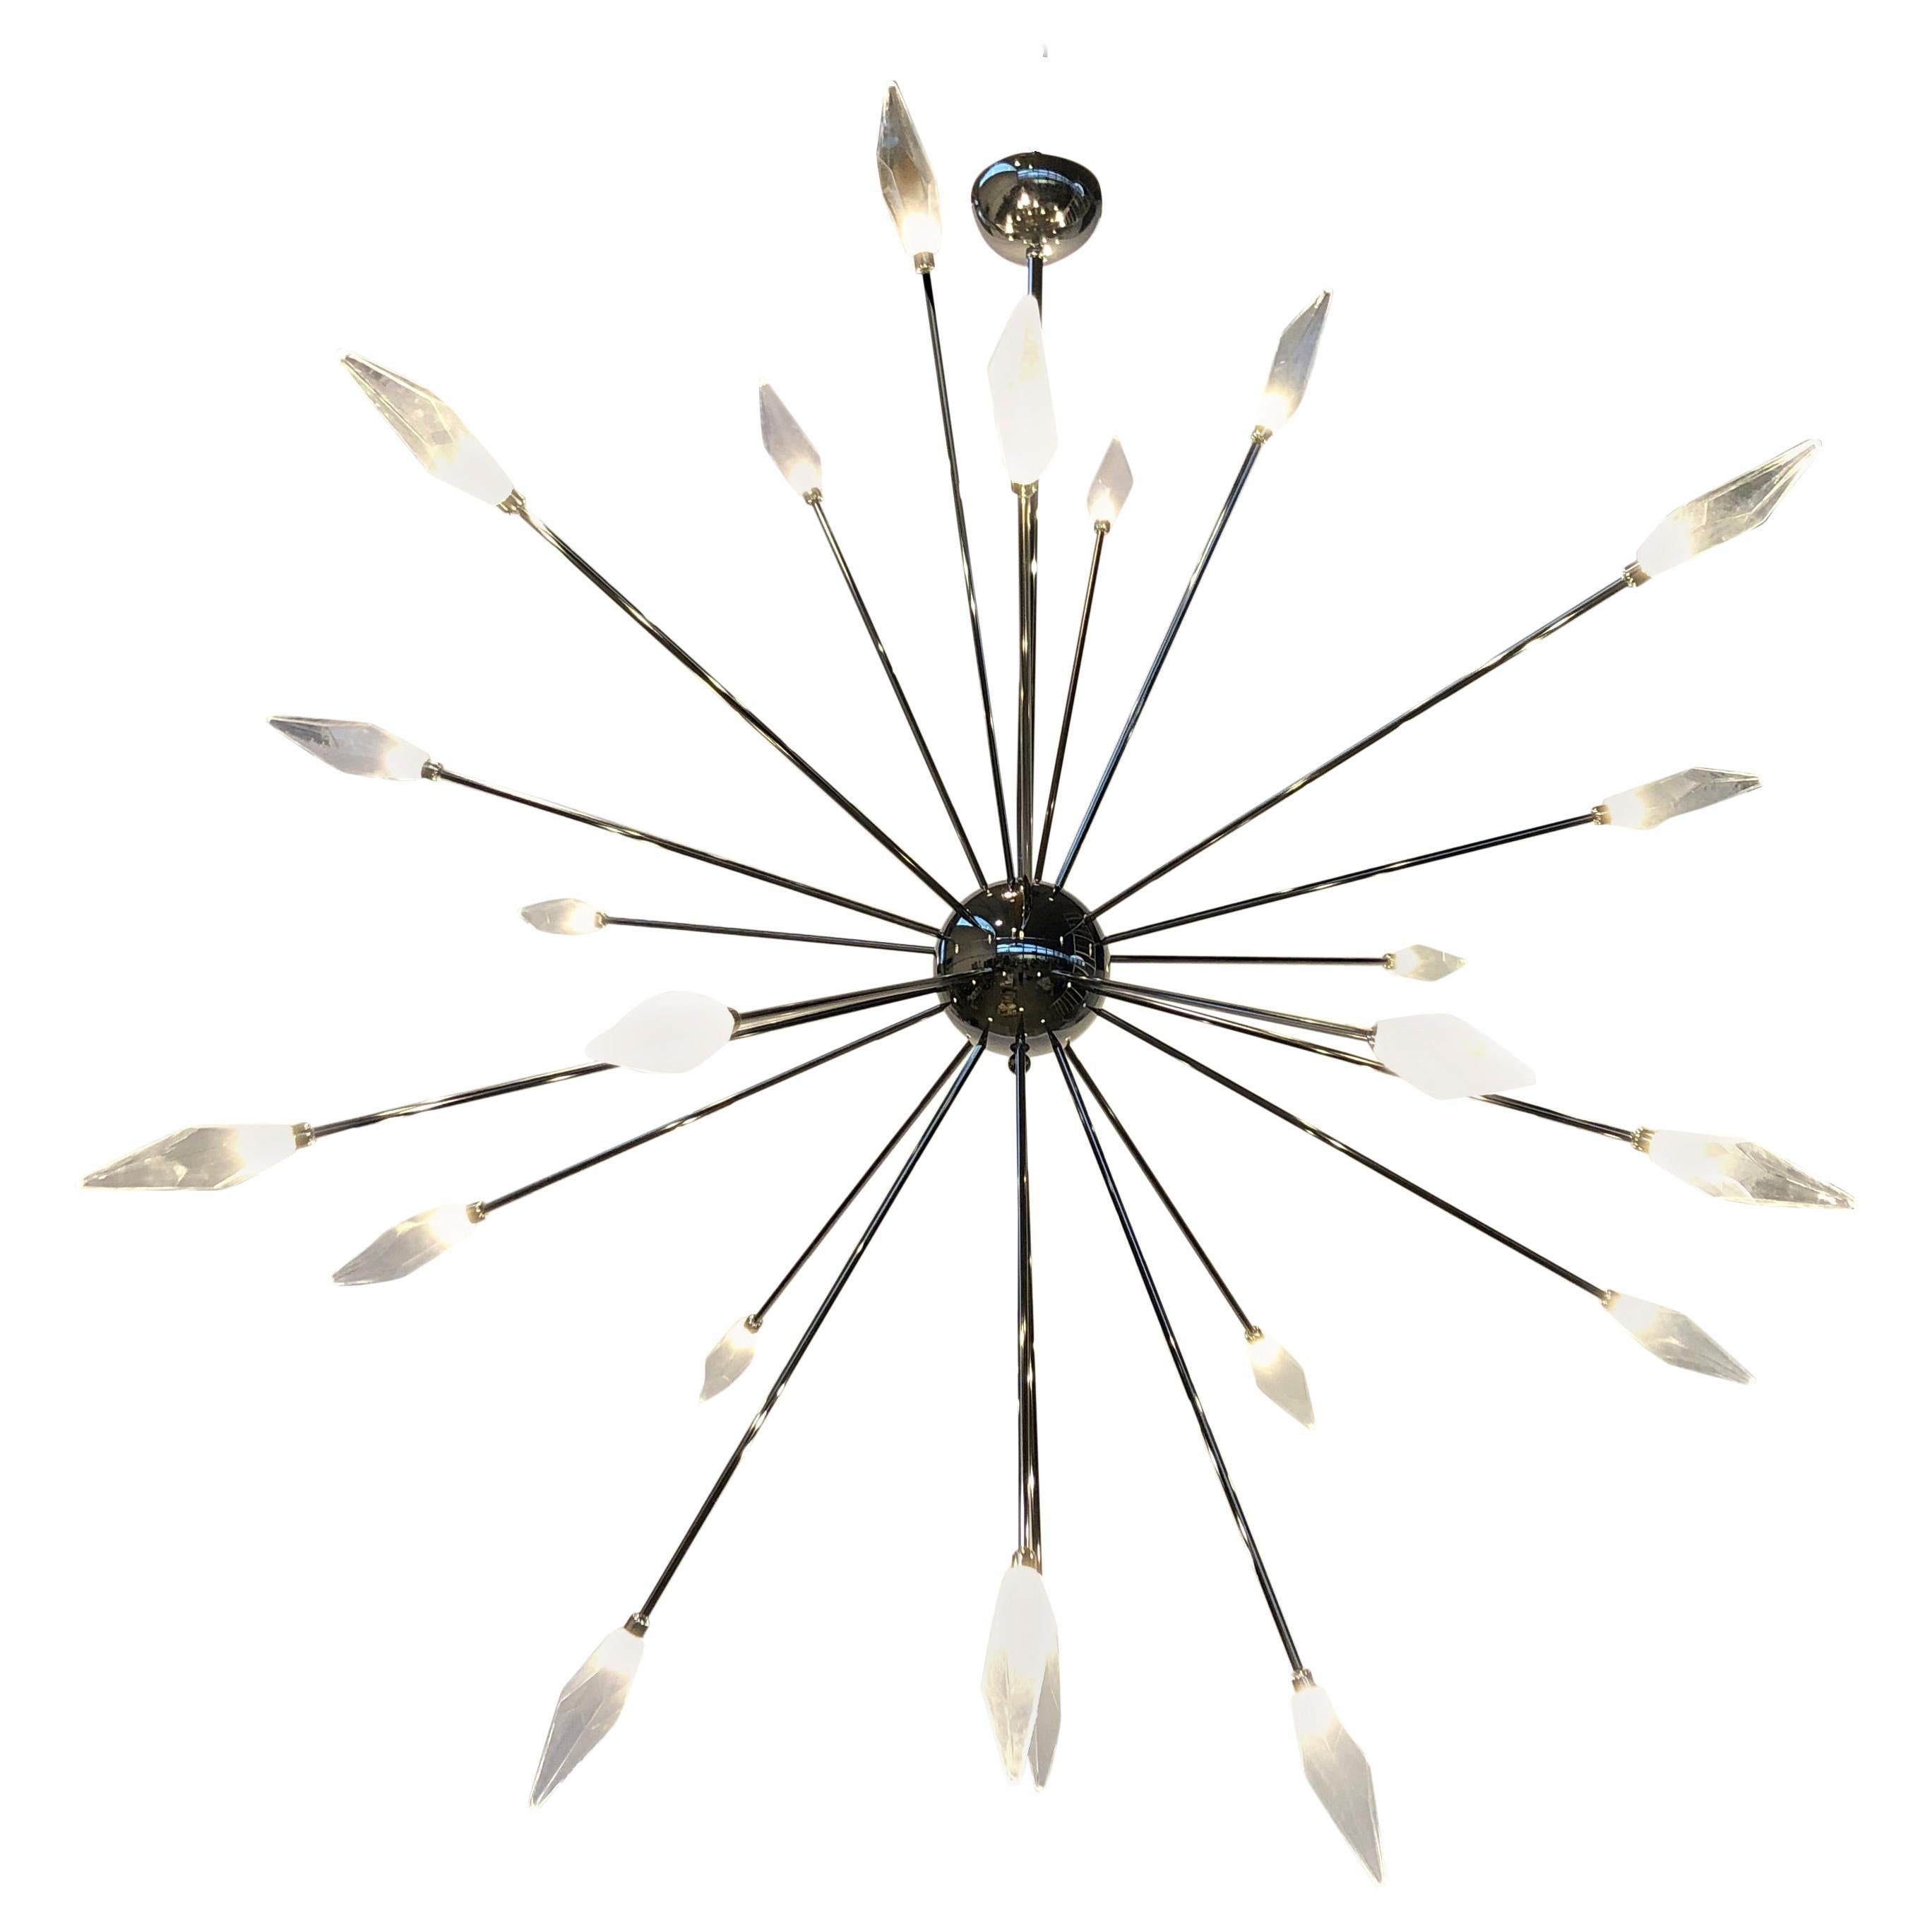 Oversized Italian Sputnik chandelier with 24 clear poliedri, or polyhedron/polyhedral shaped Murano glasses mounted on polished nickel finish frame, designed by Fabio Bergomi for Fabio Ltd, made in Italy
Measures: Diameter 118 inches, height 126